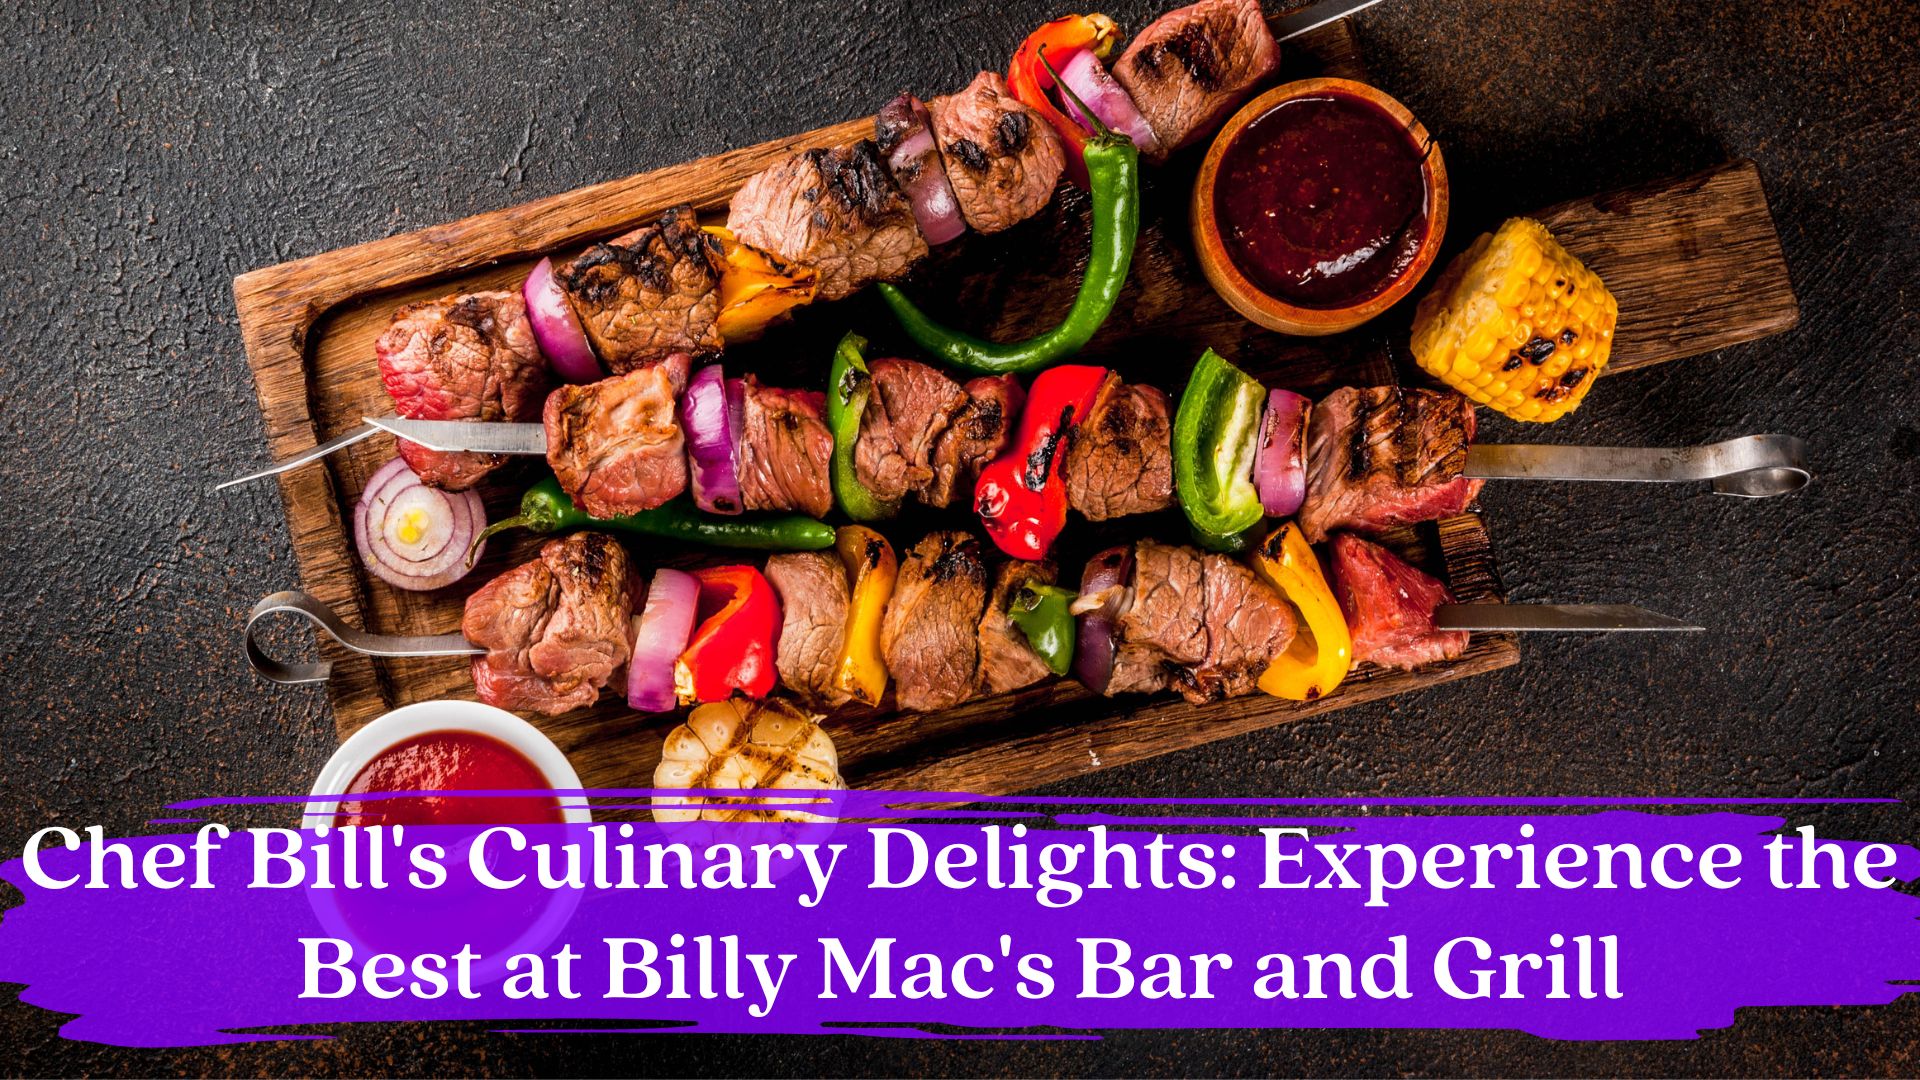 Chef Bill’s Culinary Delights: Experience the Best at Billy Mac’s Bar and Grill